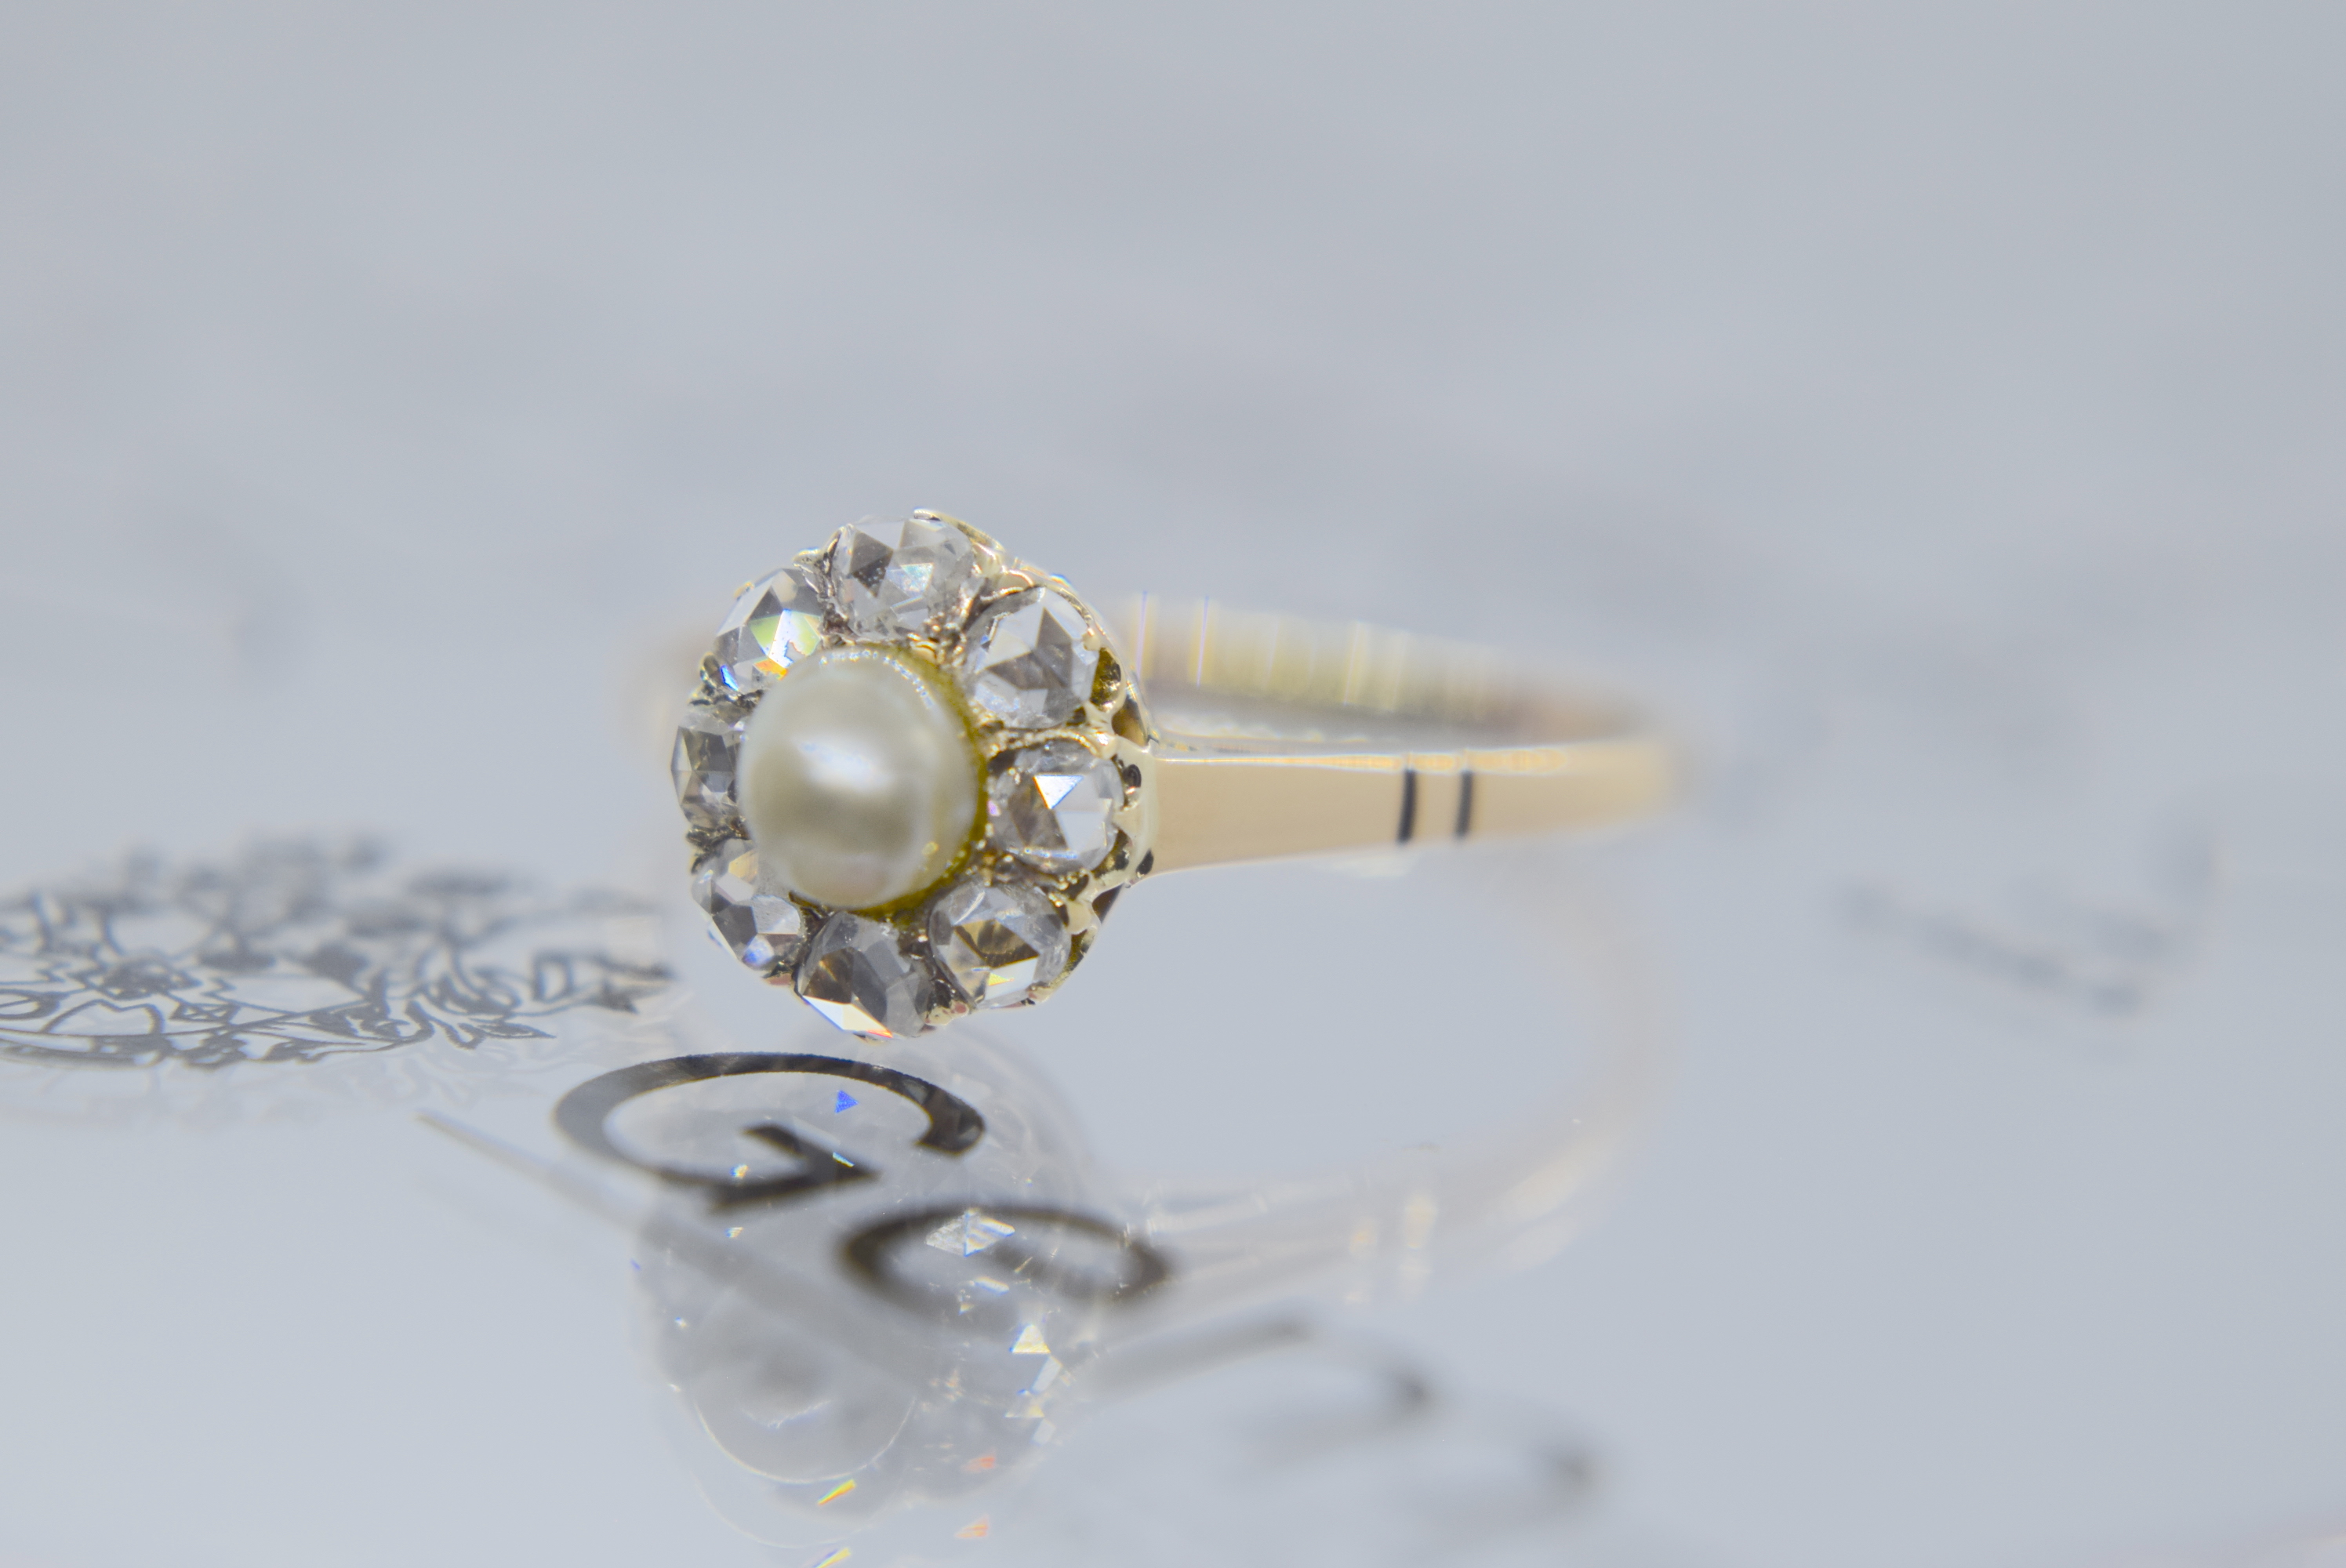 VINTAGE 1.00CT IVORY PEARL & ROSE CUT DIAMOND RING IN YELLOW & ROSE GOLD - Image 3 of 7